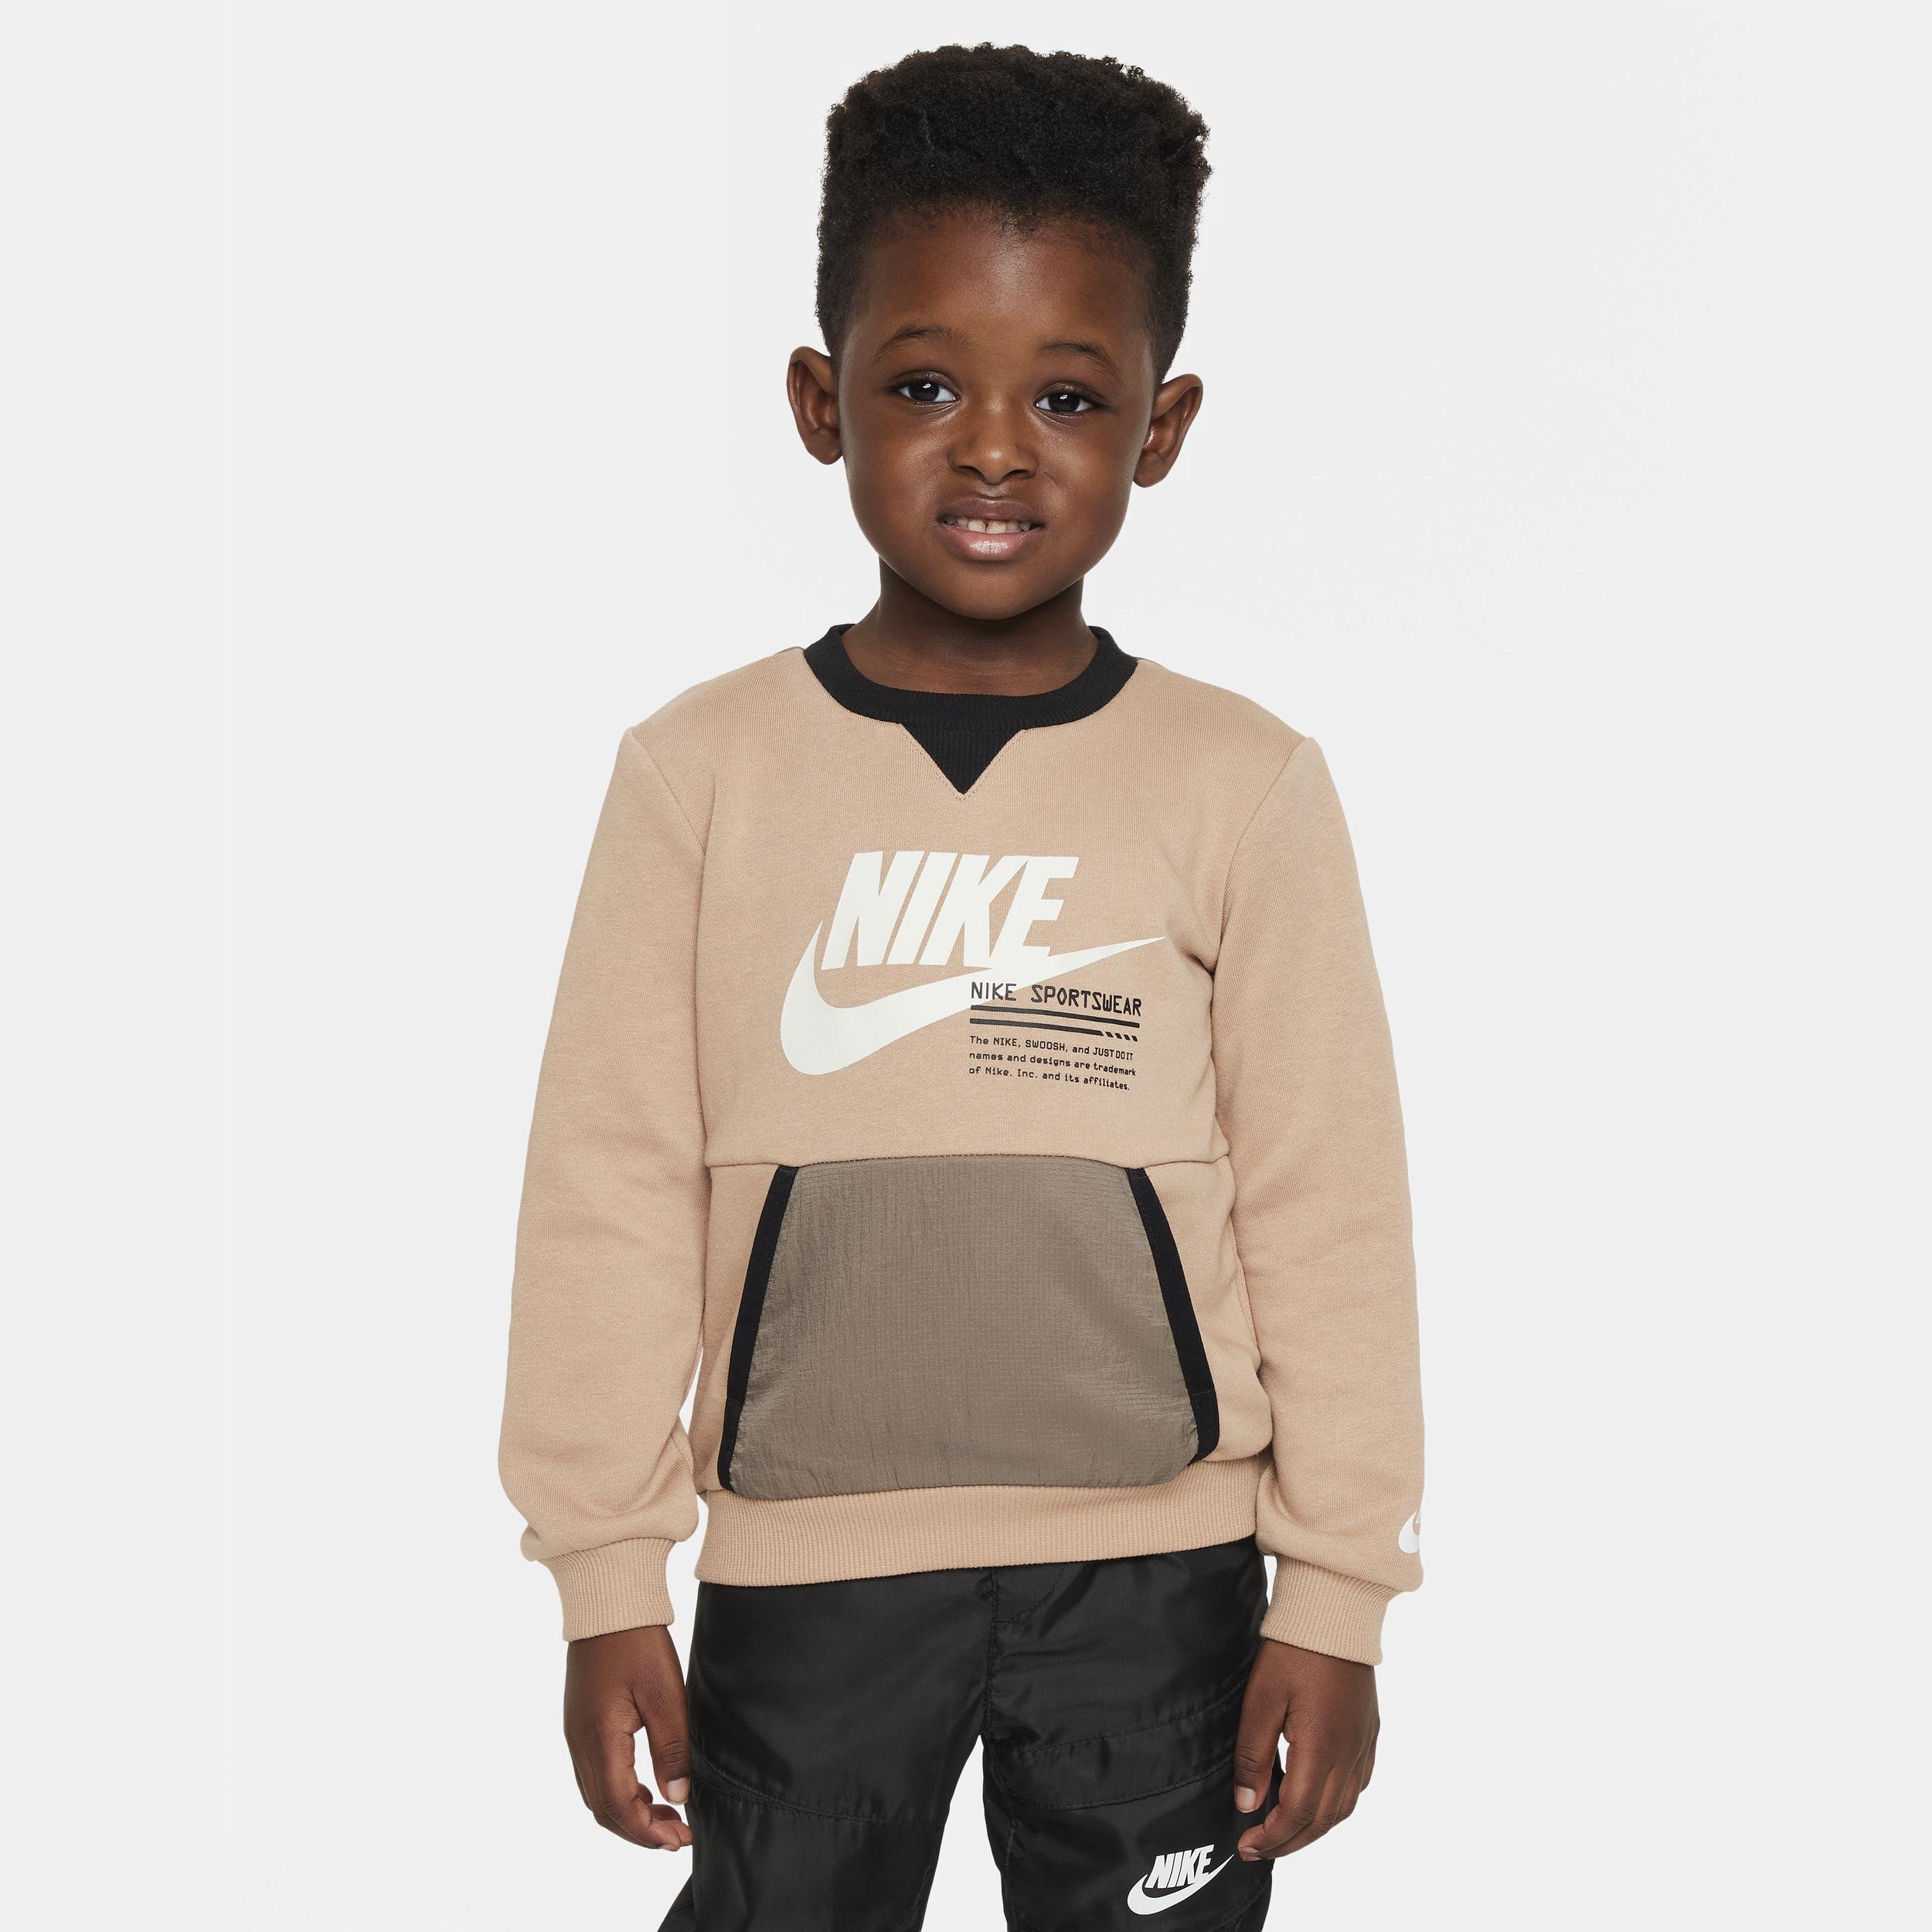 Nike Sportswear Paint Your Future Toddler French Terry Crew by NIKE